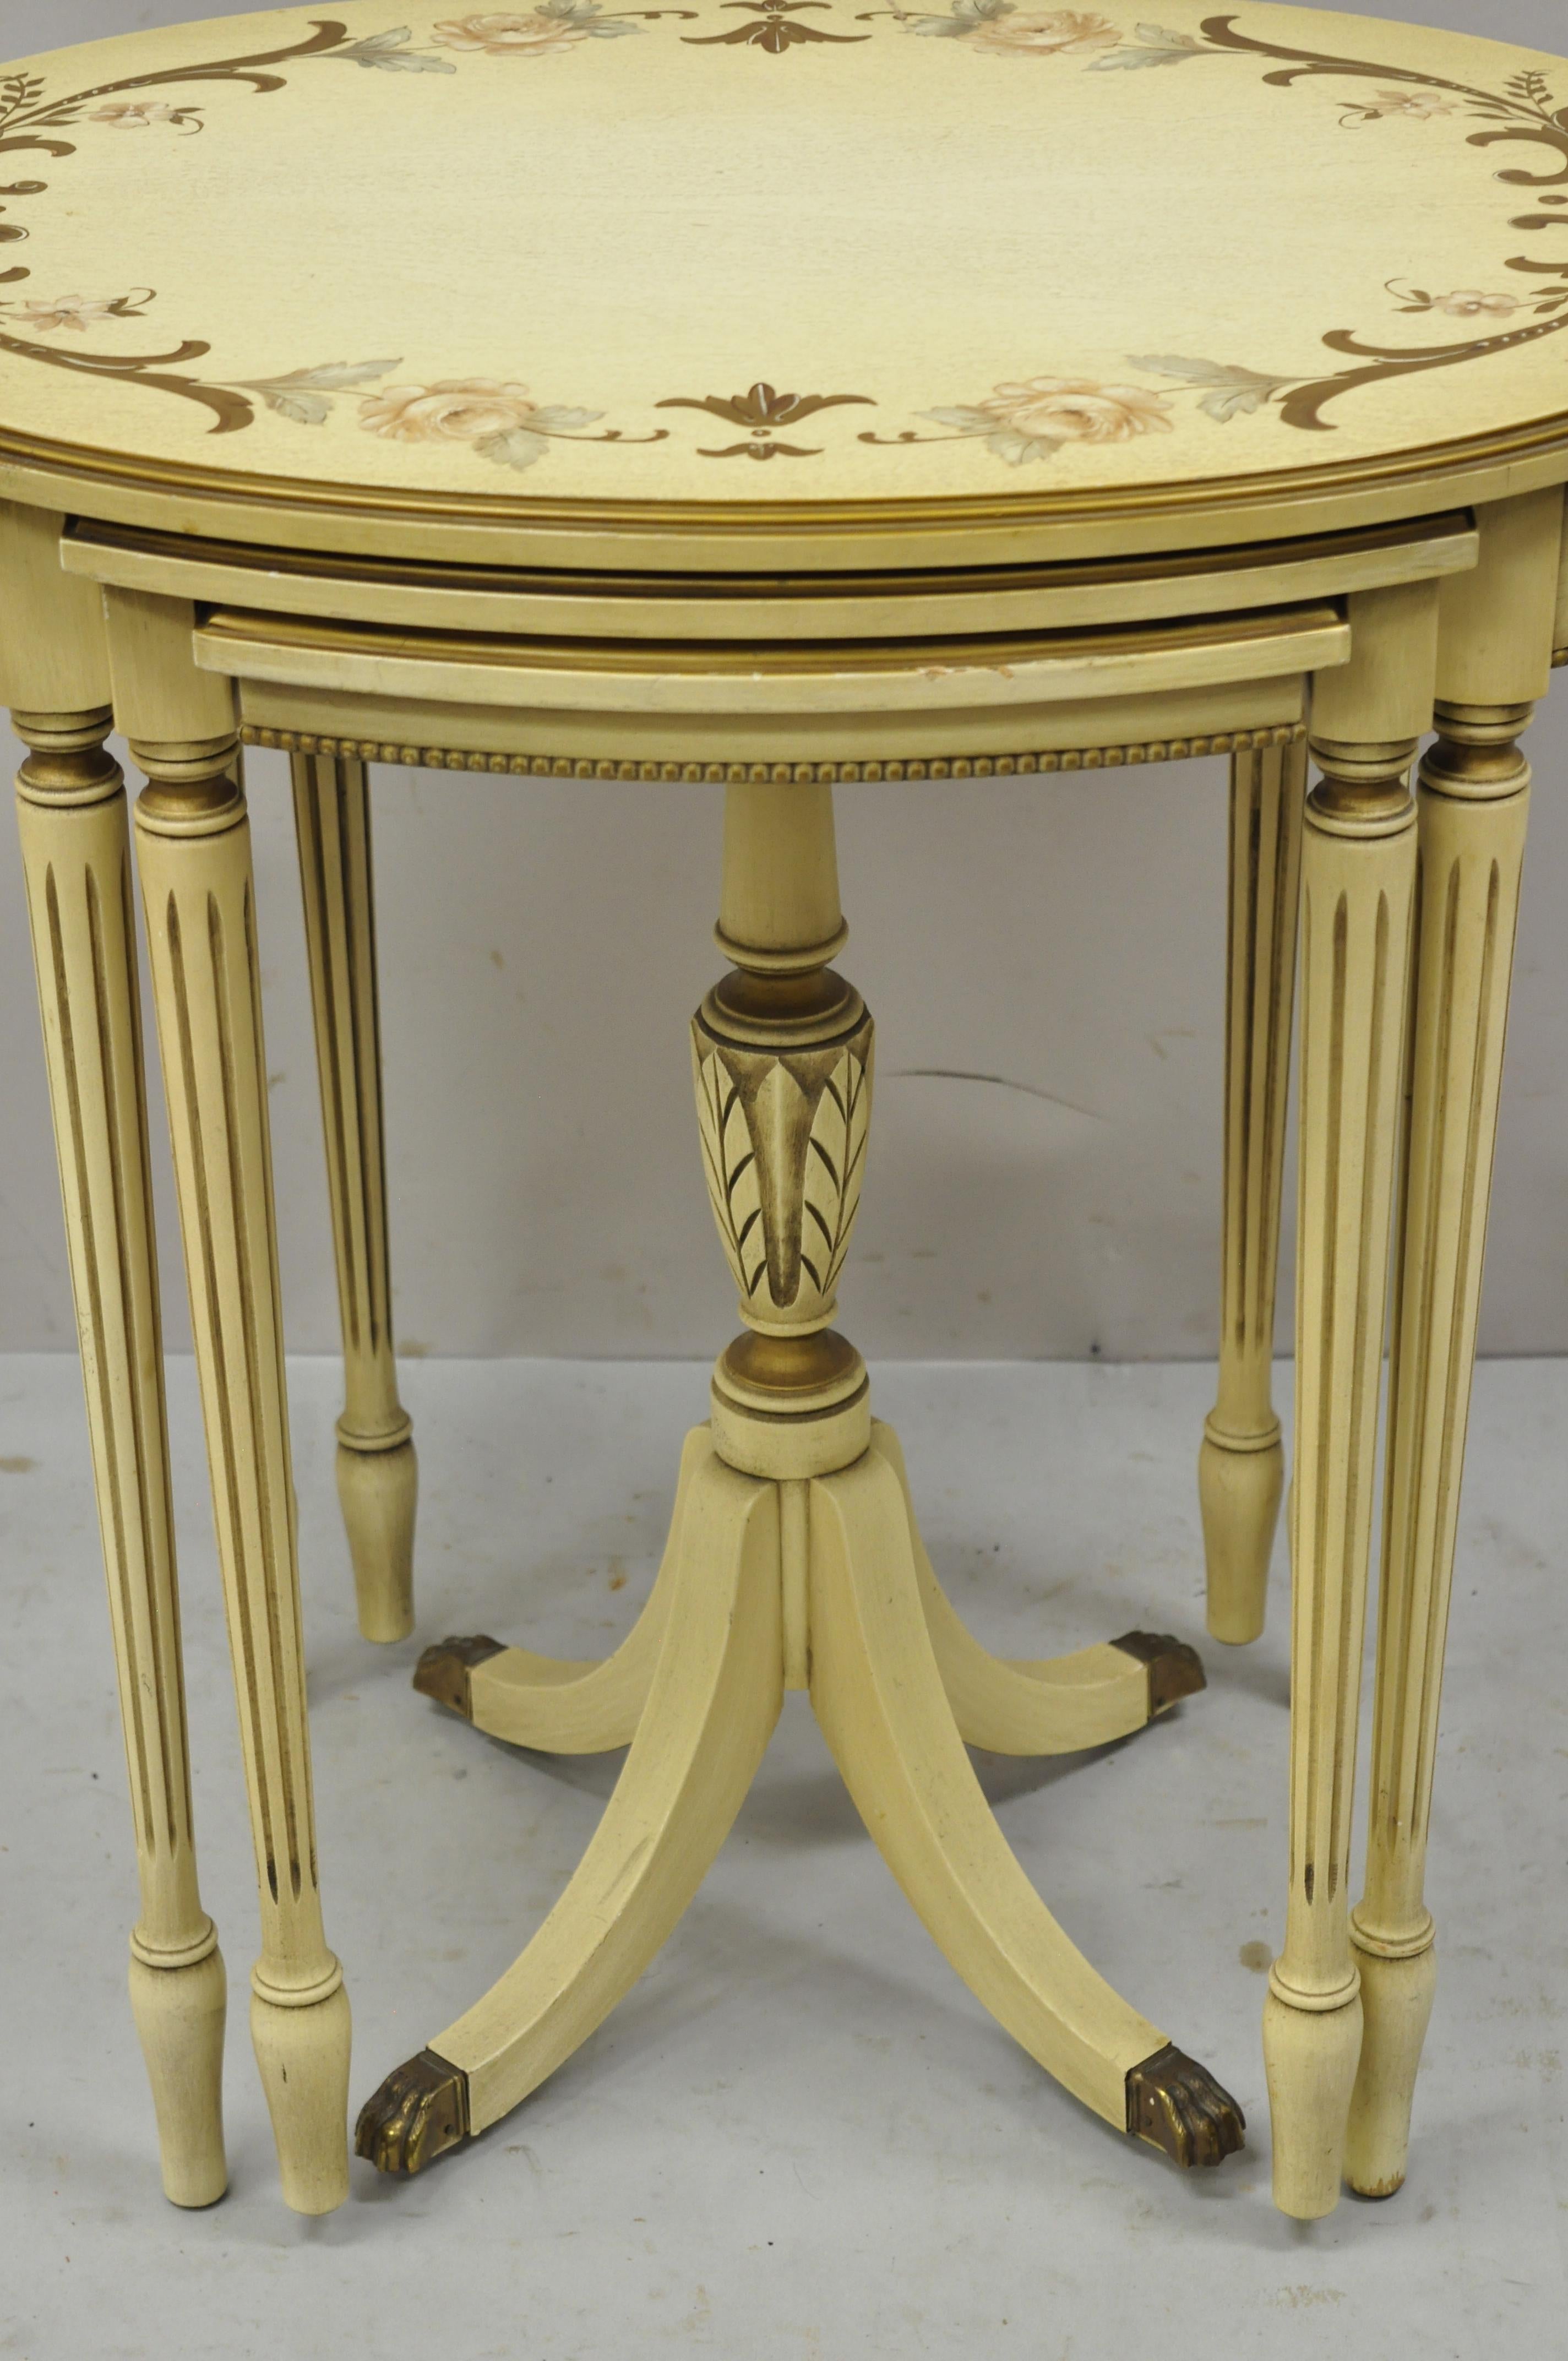 Antique Cream Painted French Nesting Side Table Imperial Grand Rapids, Set of 3 2